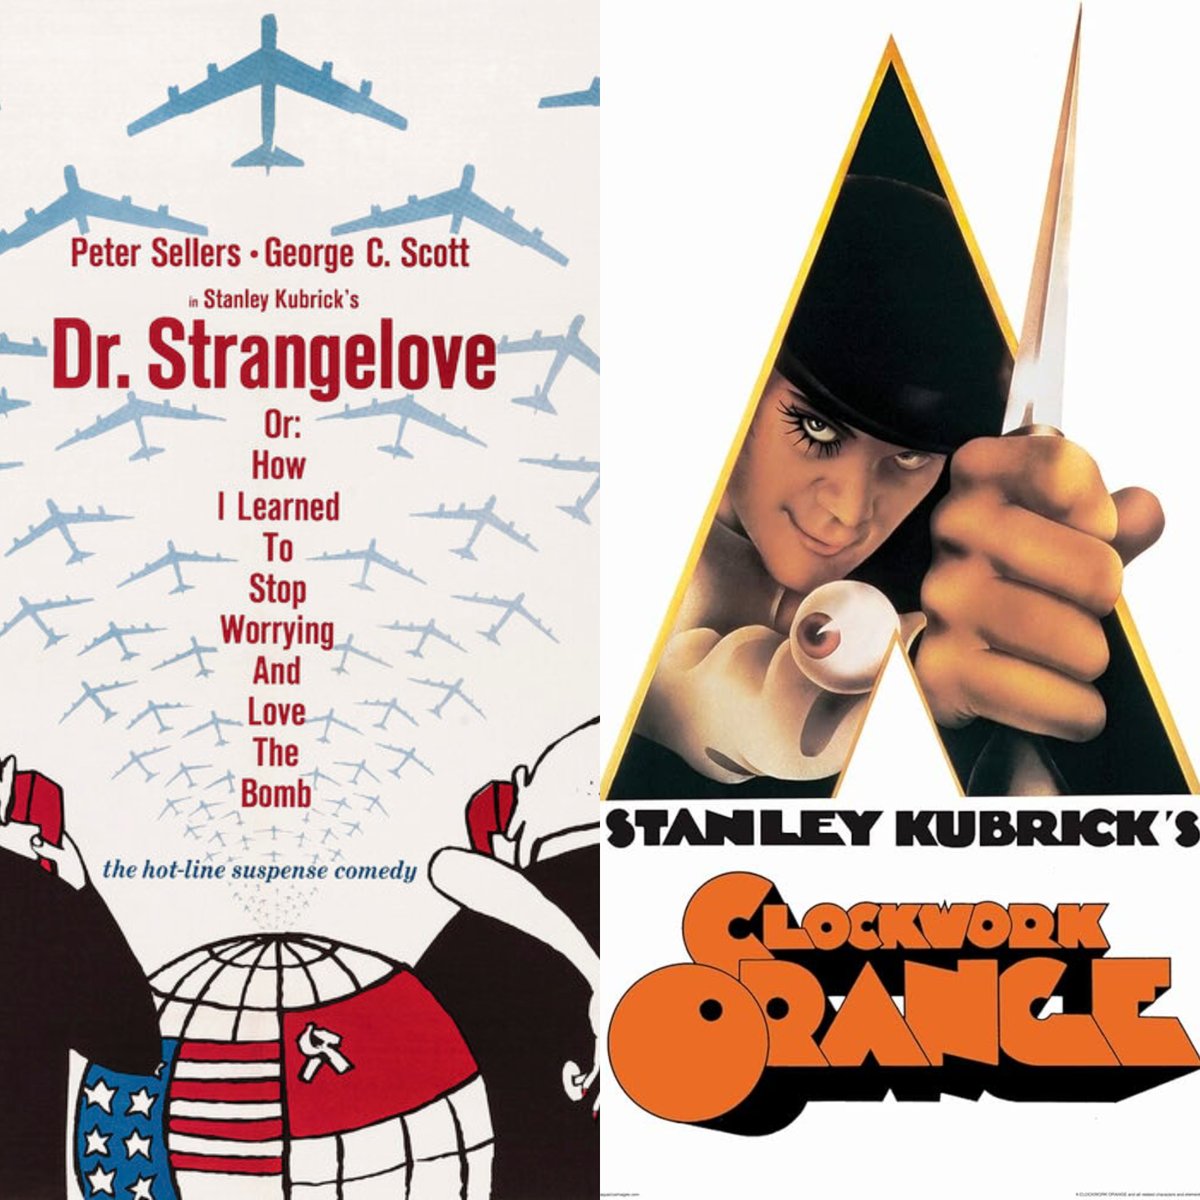 The final screenings of #DrStrangelove & #AClockworkOrange as part of @CineplexMovies's #ClassicFilmSeries are April 26 (Strangelove) & April 28 (Clockwork)! Come see the movies & my on-screen intros for these classic films! Check local listings for a theatre & time near you!